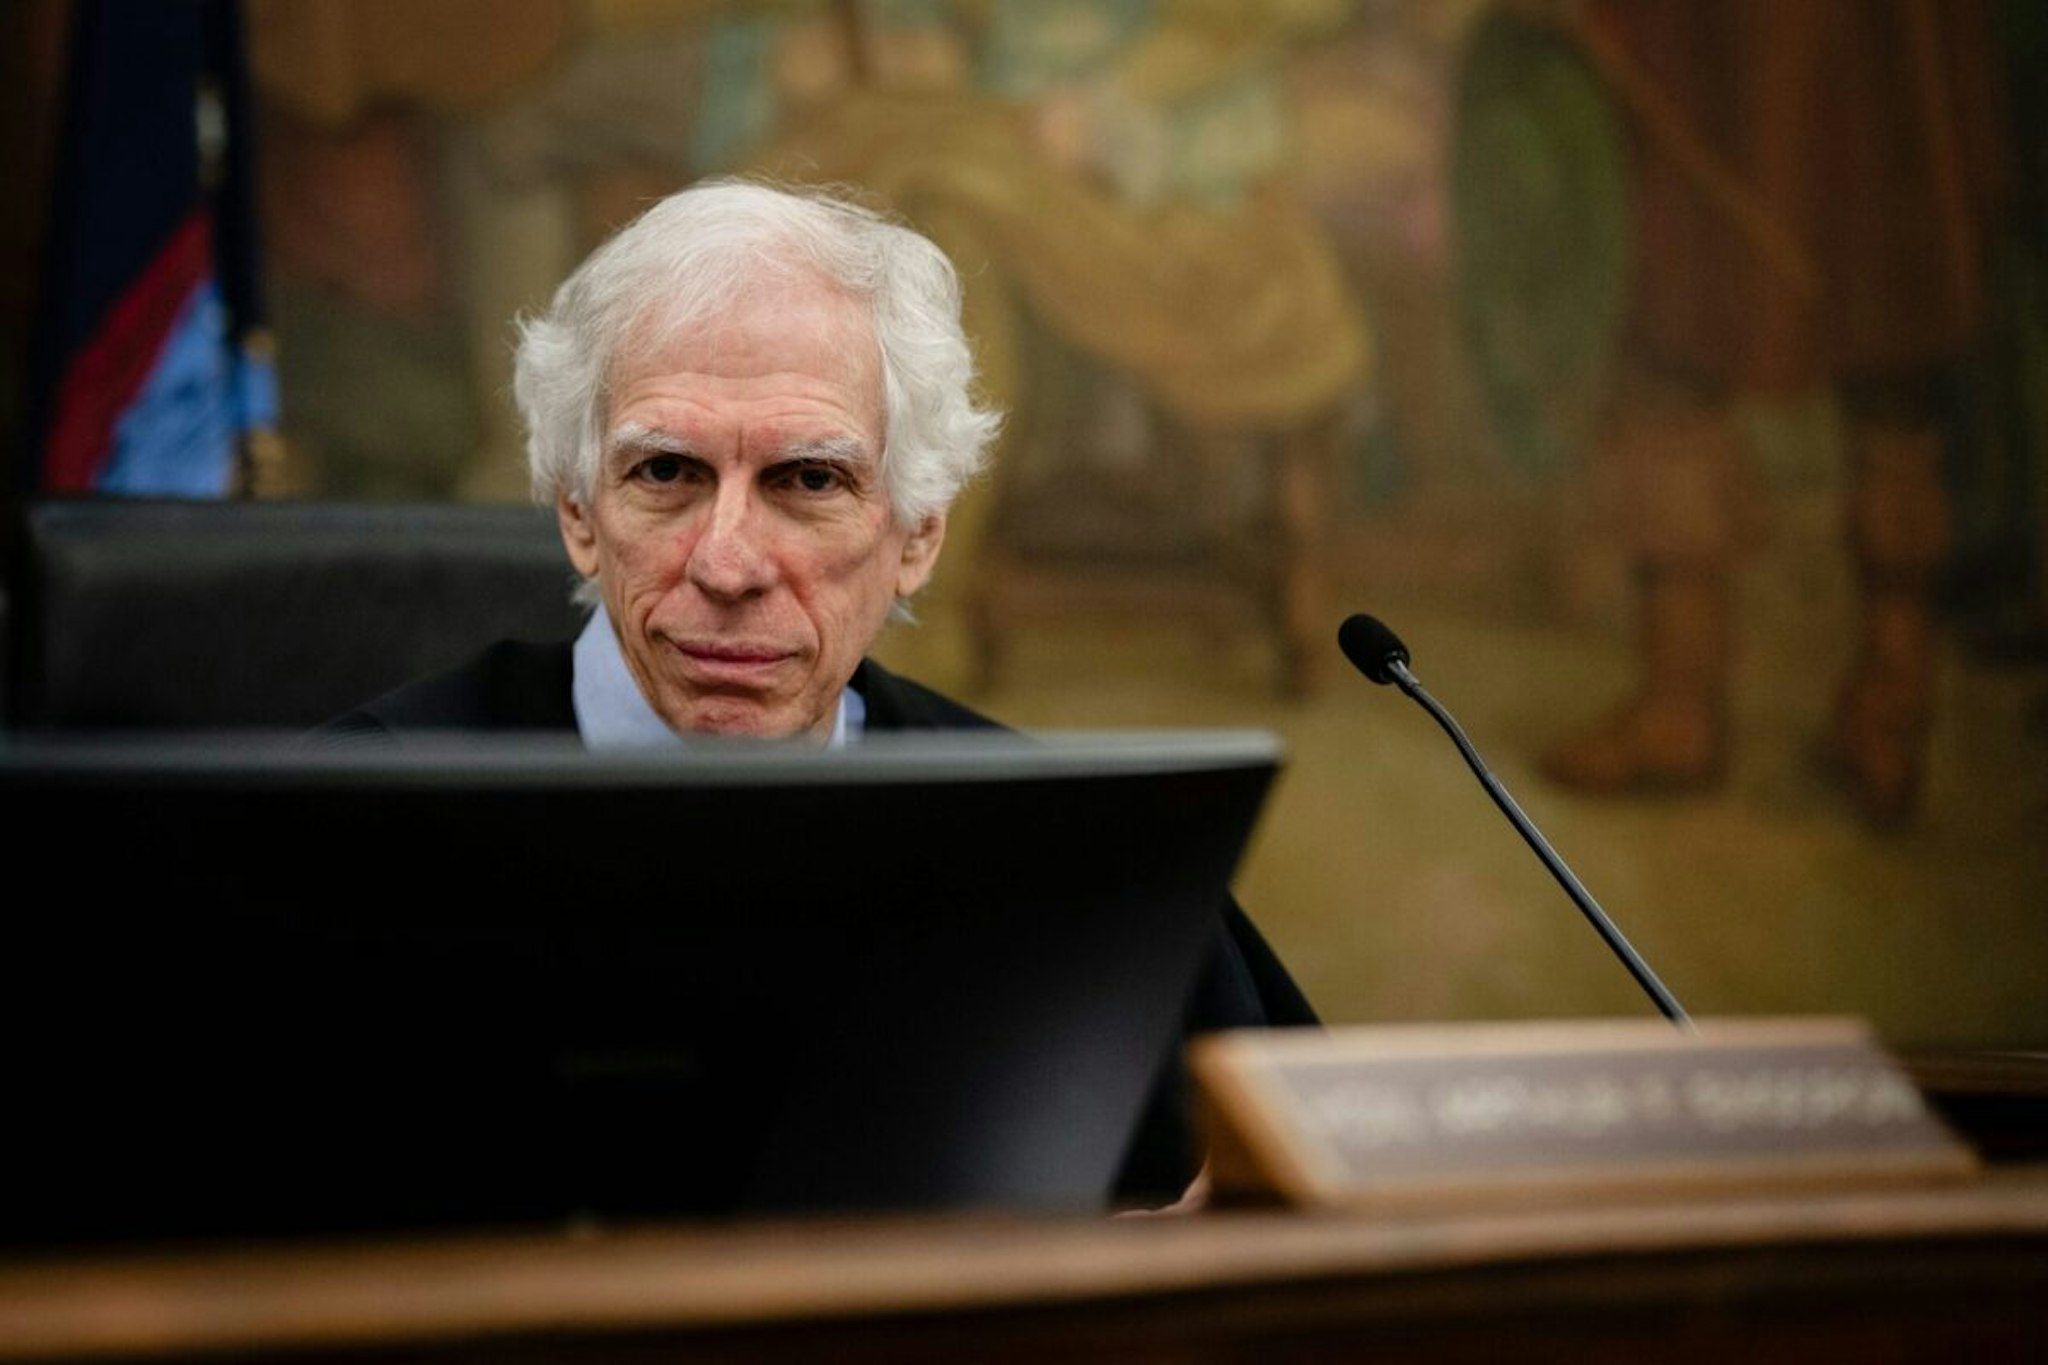 Justice Arthur Engoron presides over the civil fraud trial of the Trump Organization at the New York State Supreme Court in New York City on November 13, 2023.